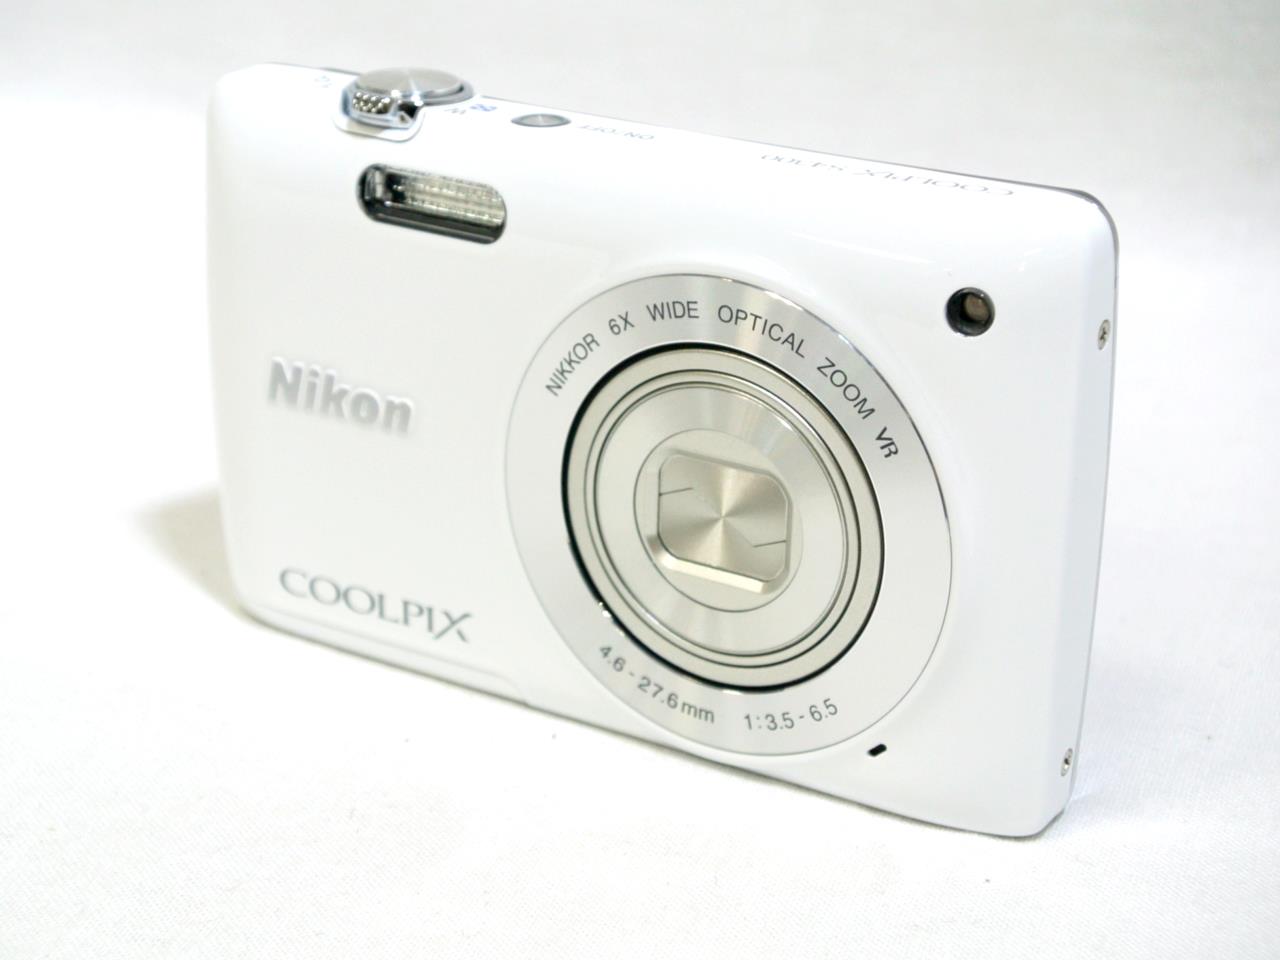 Nikon COOLPIX S4300 コンパクト デジタルカメラ コンパクトデジタルカメラ